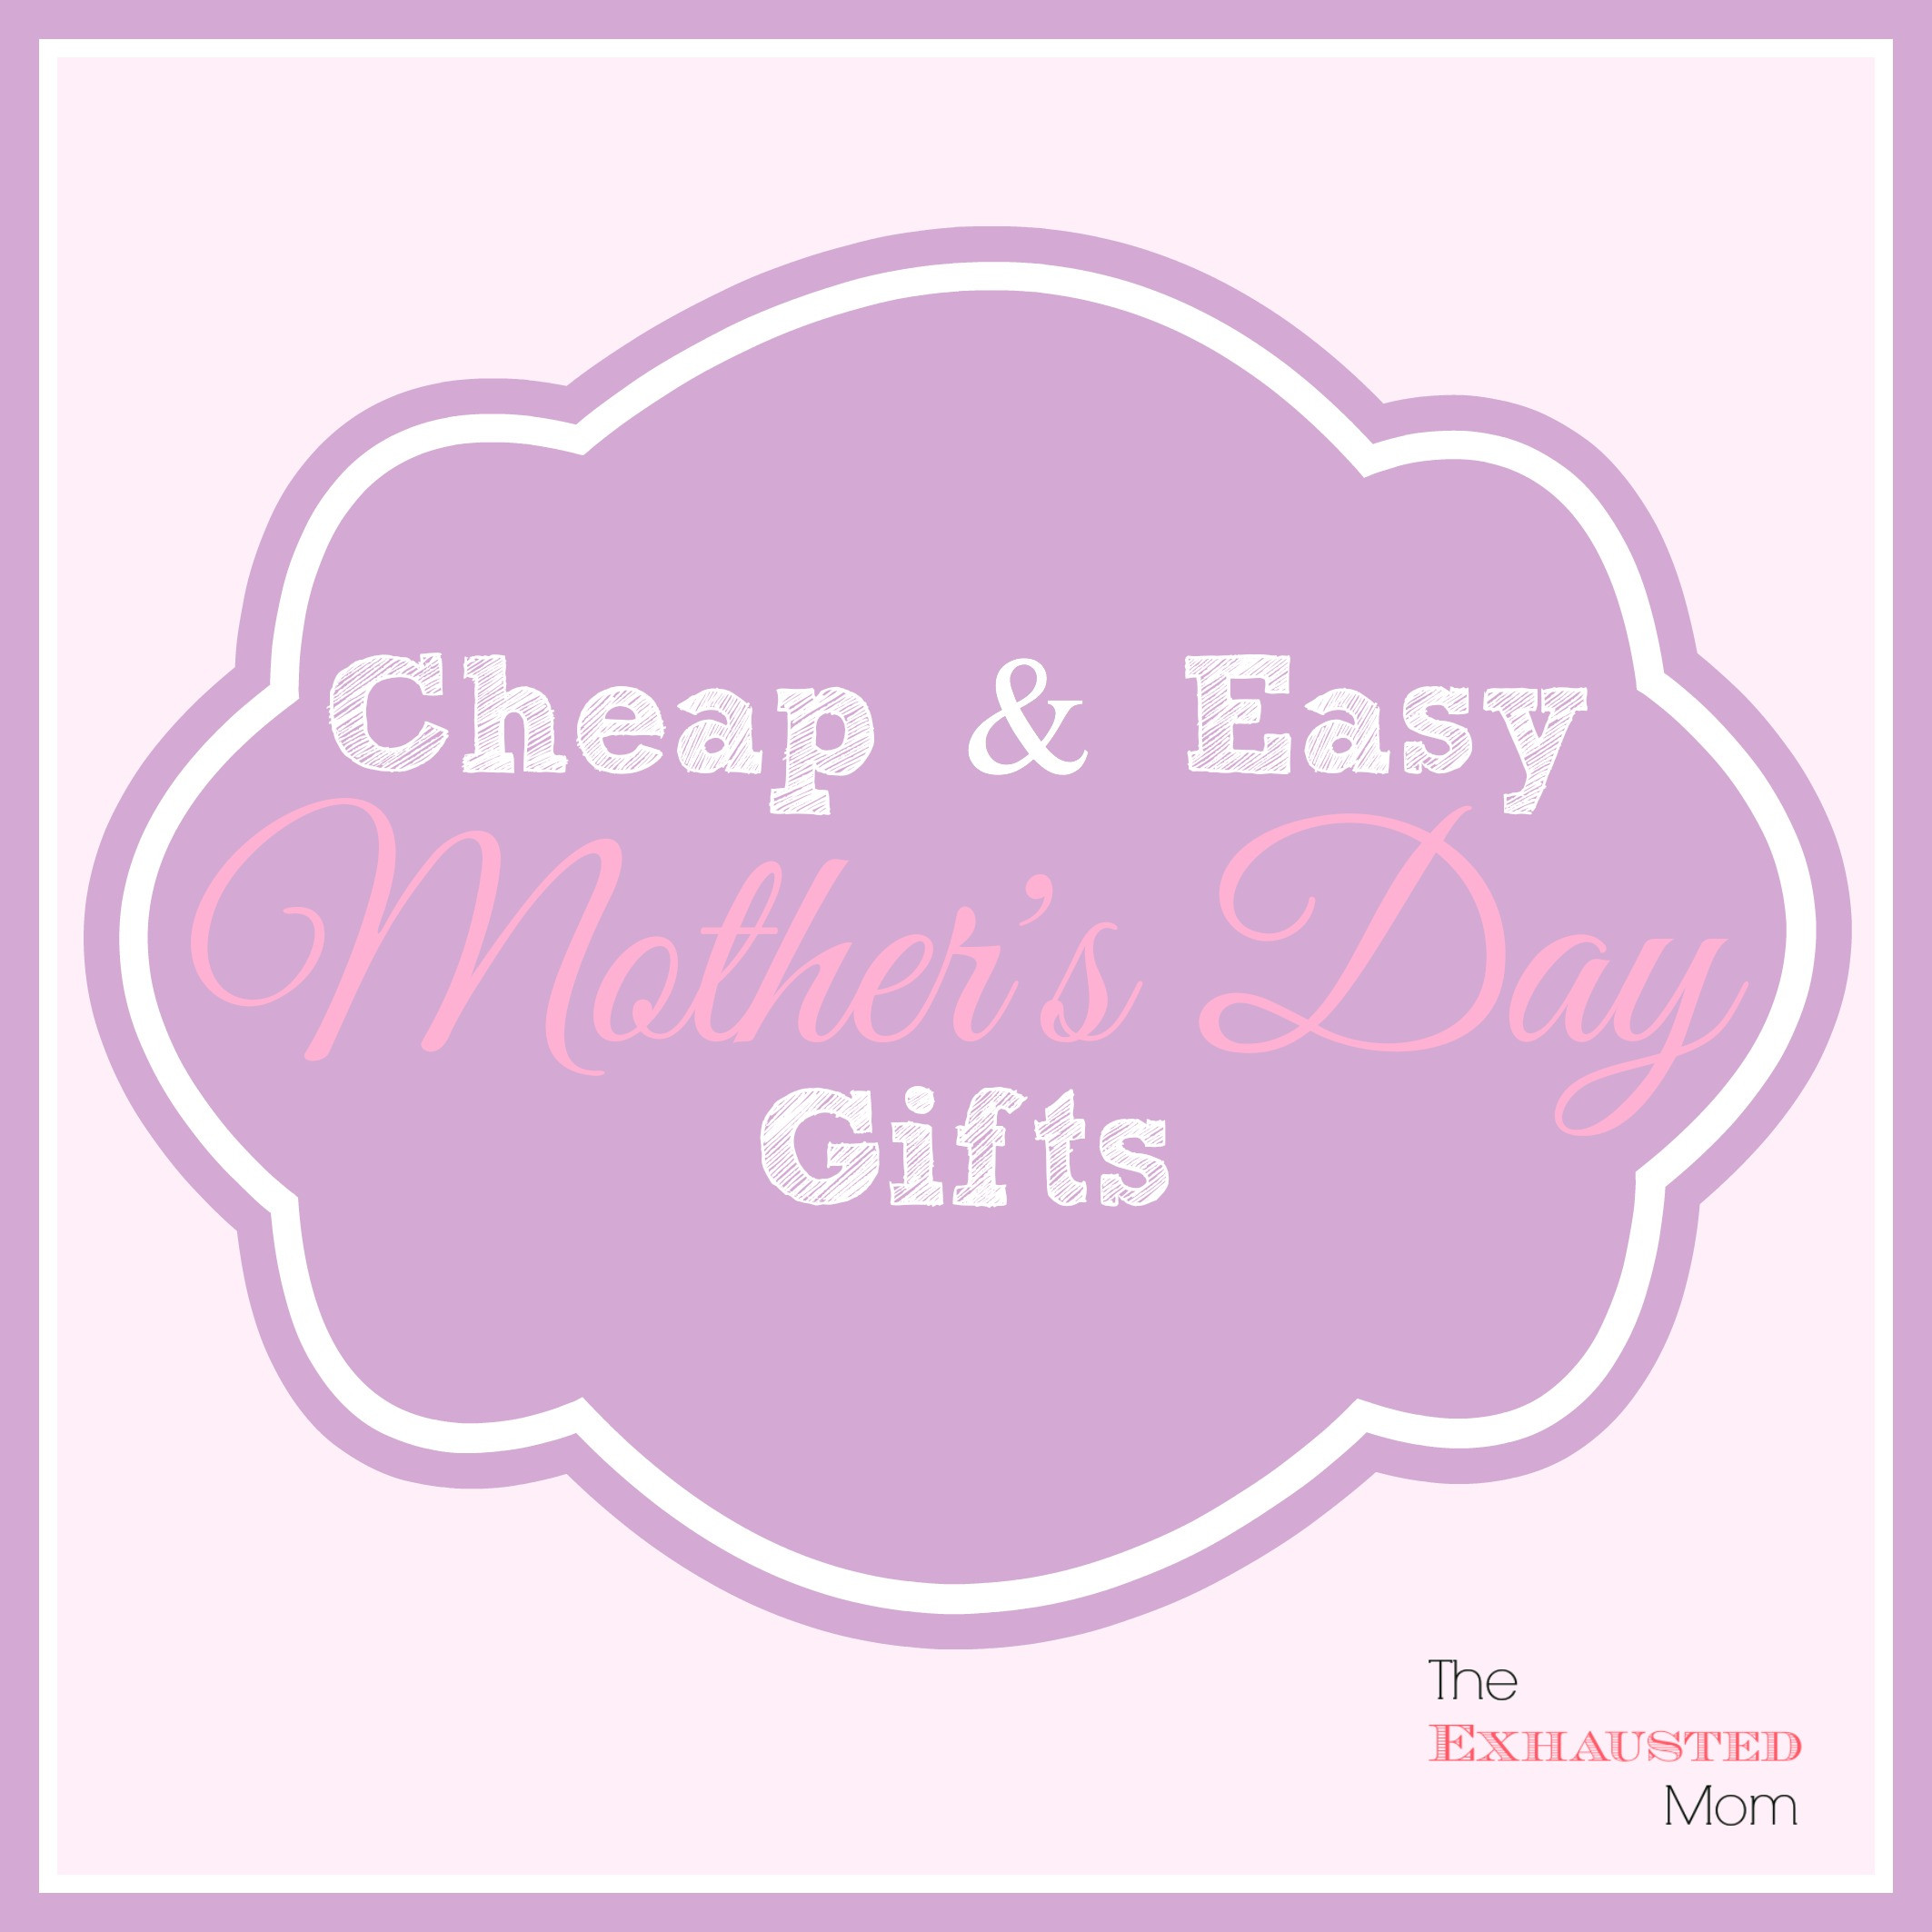 Cheap Mother's Day Gifts
 Cheap & Easy Mother s Day Gifts The Exhausted Mom